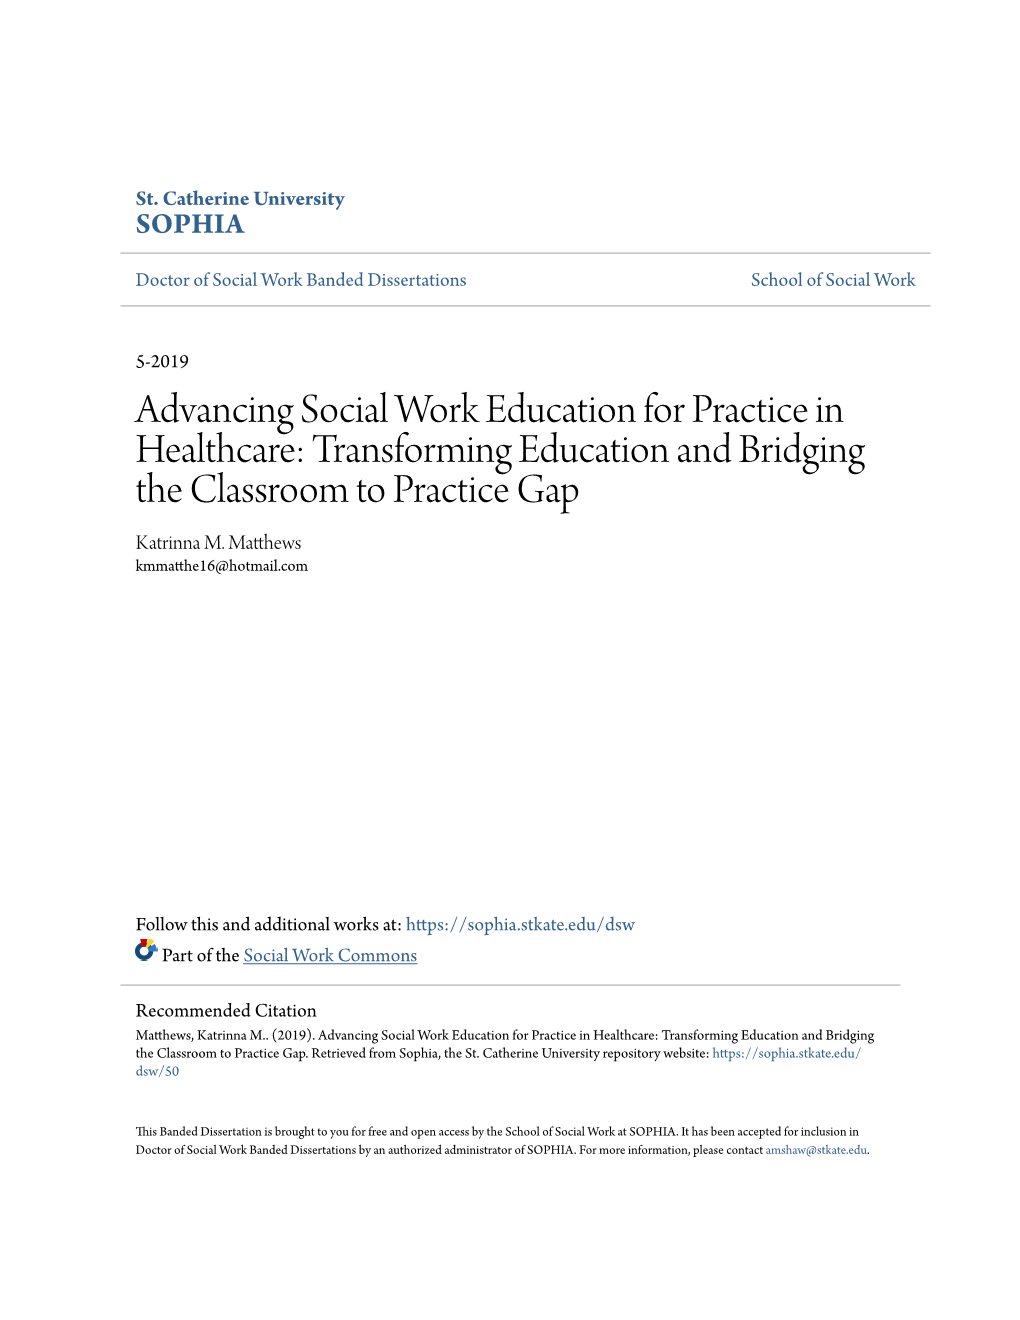 Advancing Social Work Education for Practice in Healthcare: Transforming Education and Bridging the Classroom to Practice Gap Katrinna M